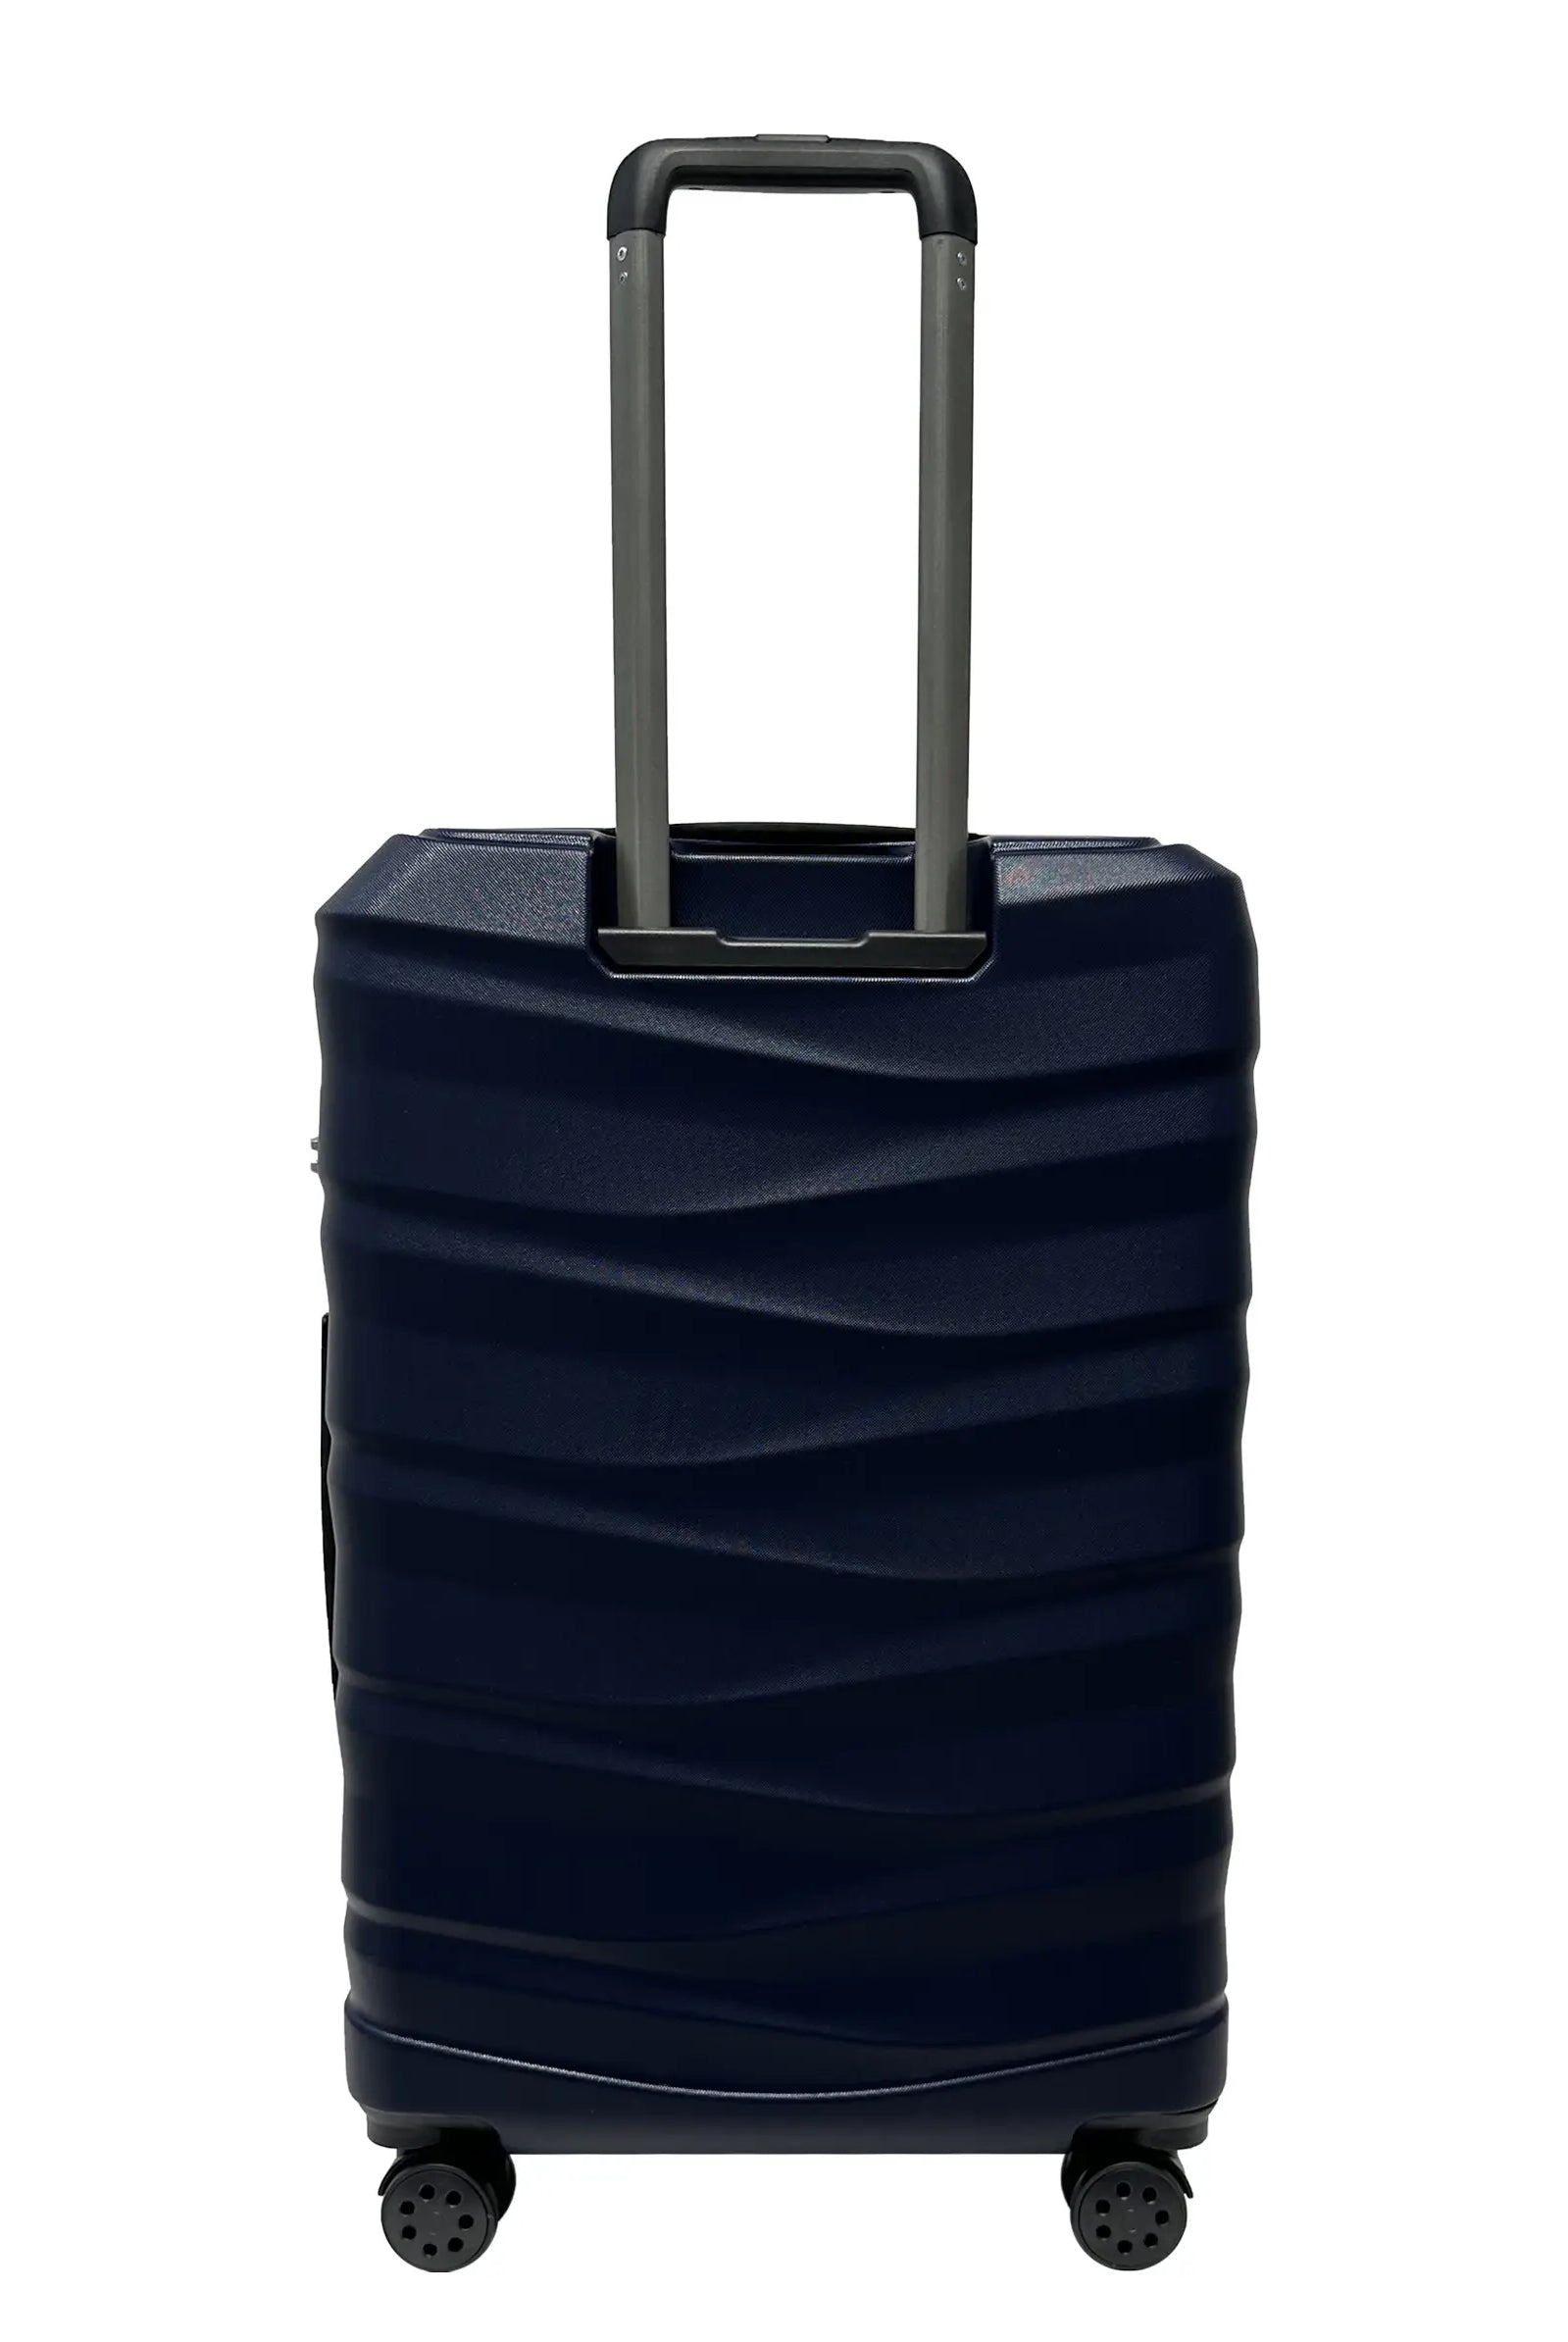 Navy carry on luggage